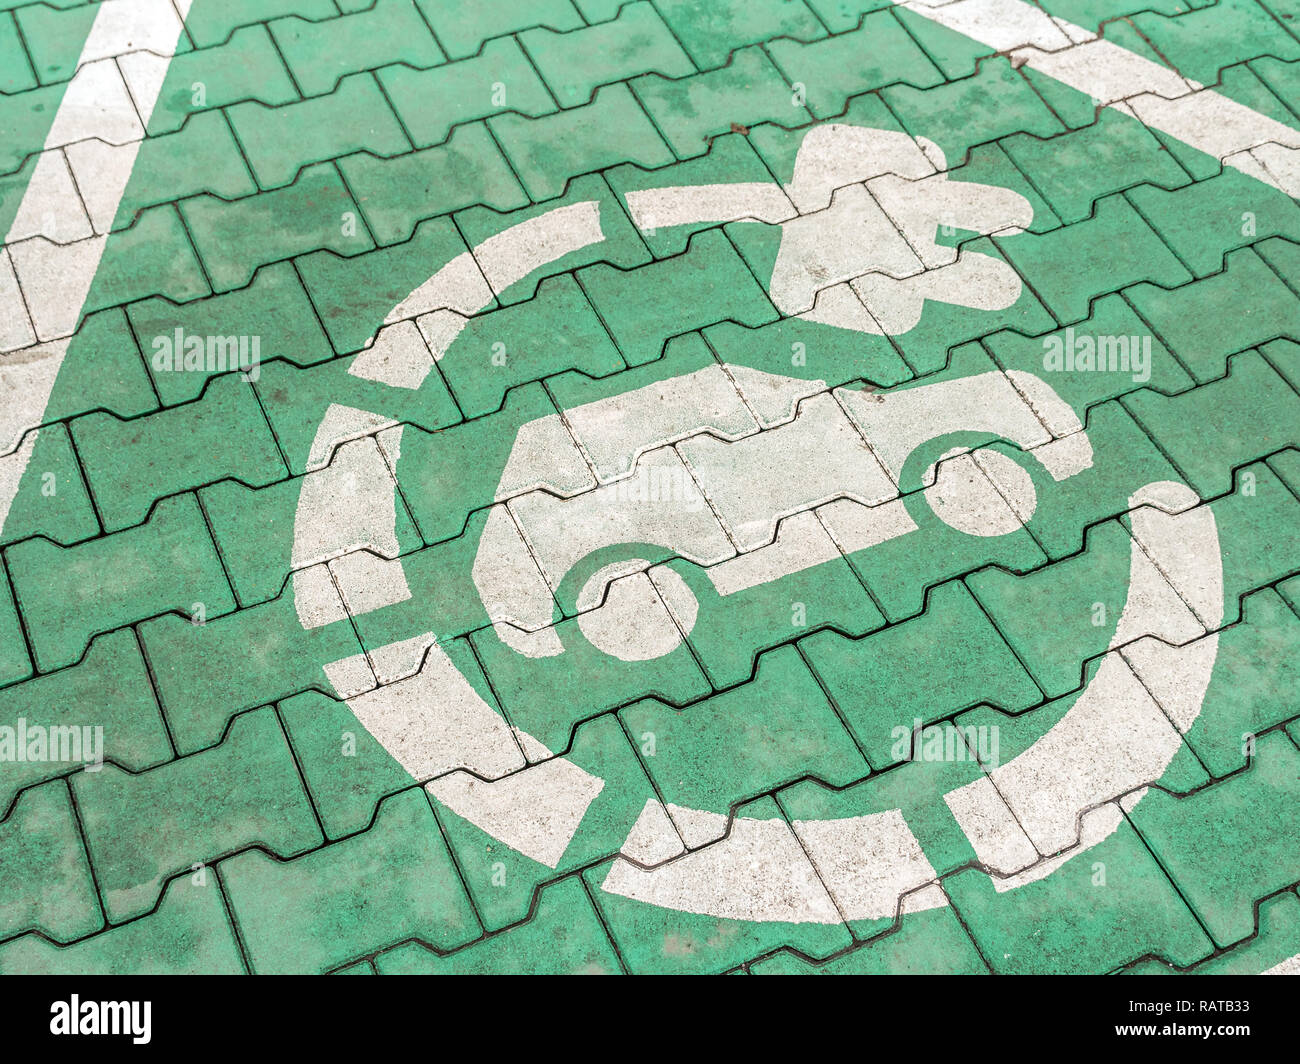 Electric car charging symbol painted on parking lot paving surface Stock Photo